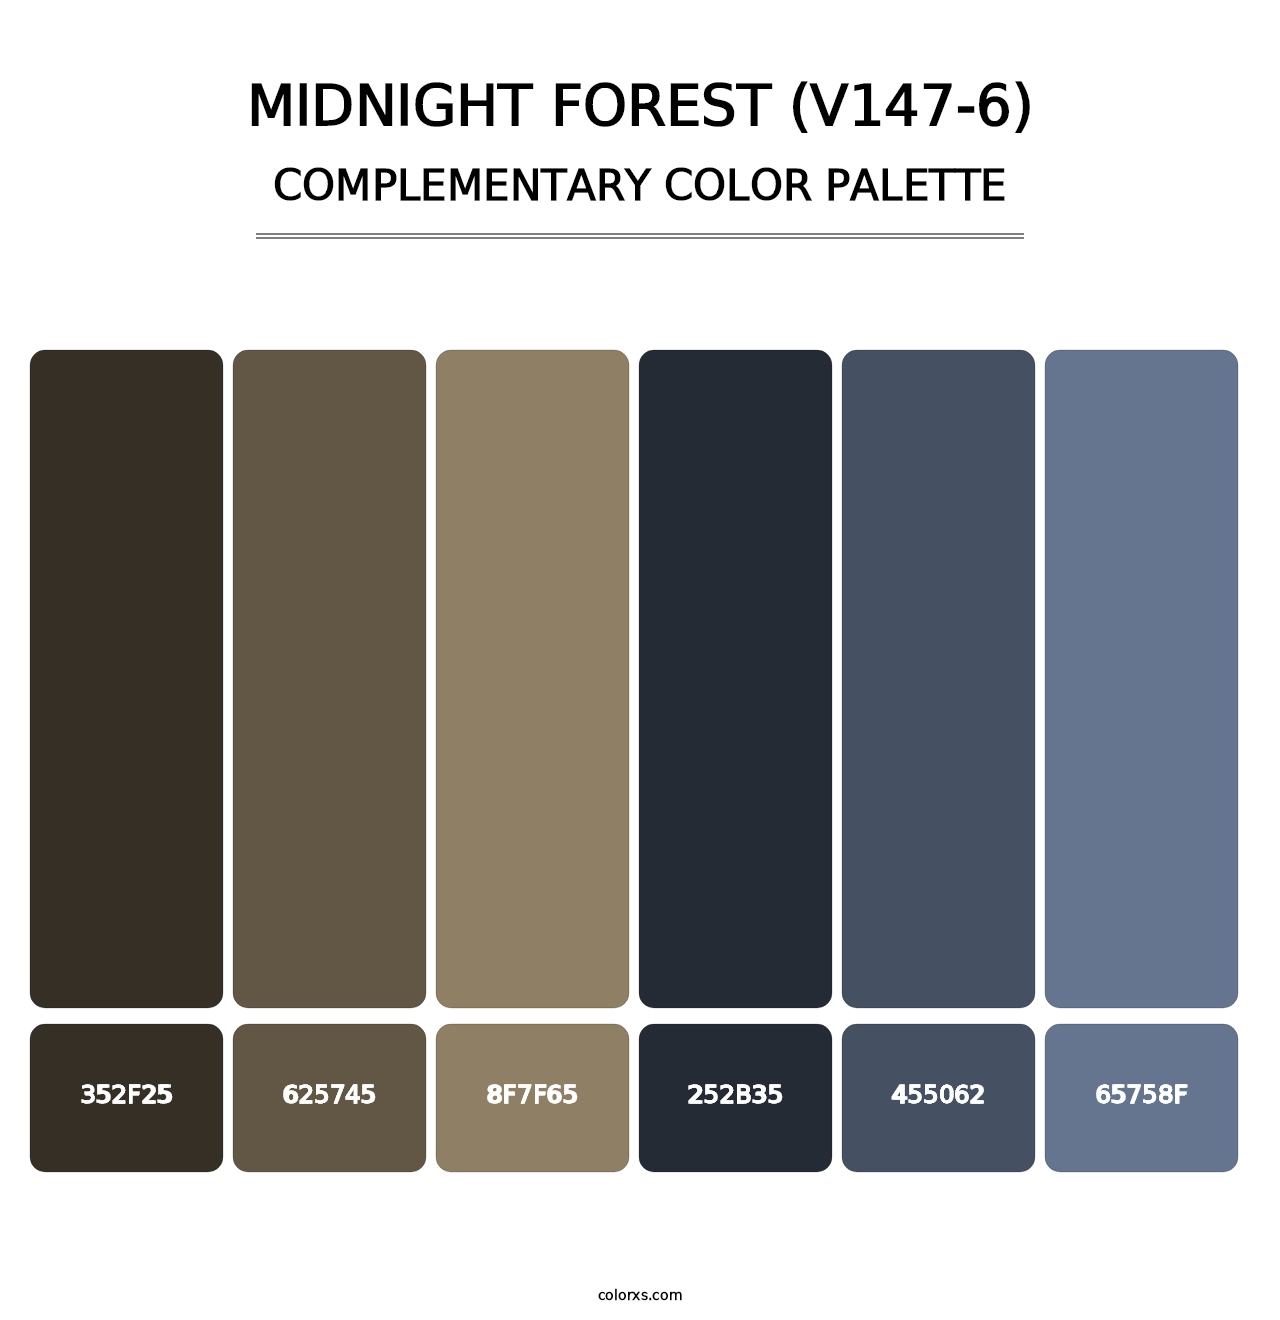 Midnight Forest (V147-6) - Complementary Color Palette